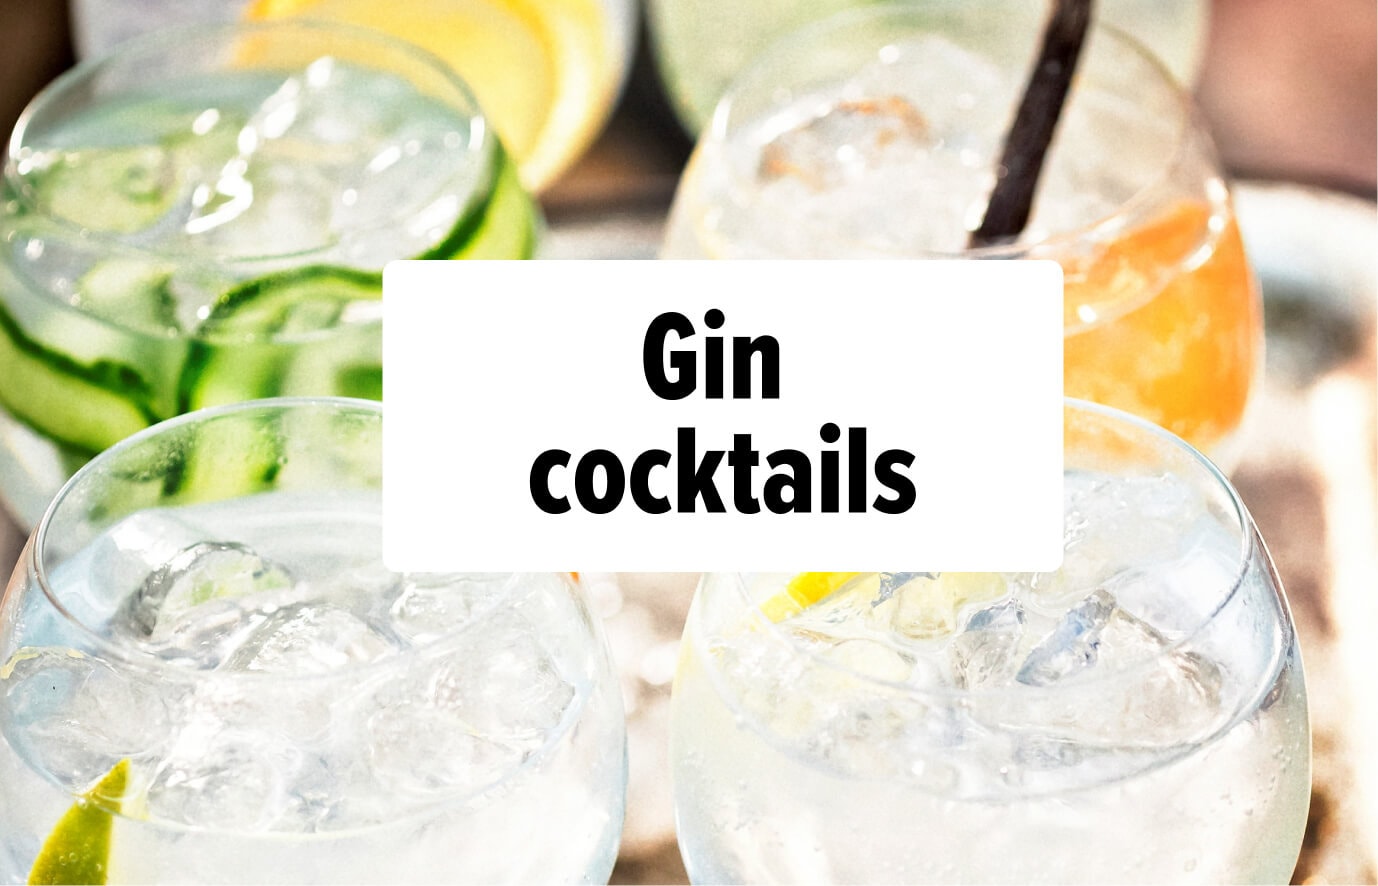 Gin cocktails